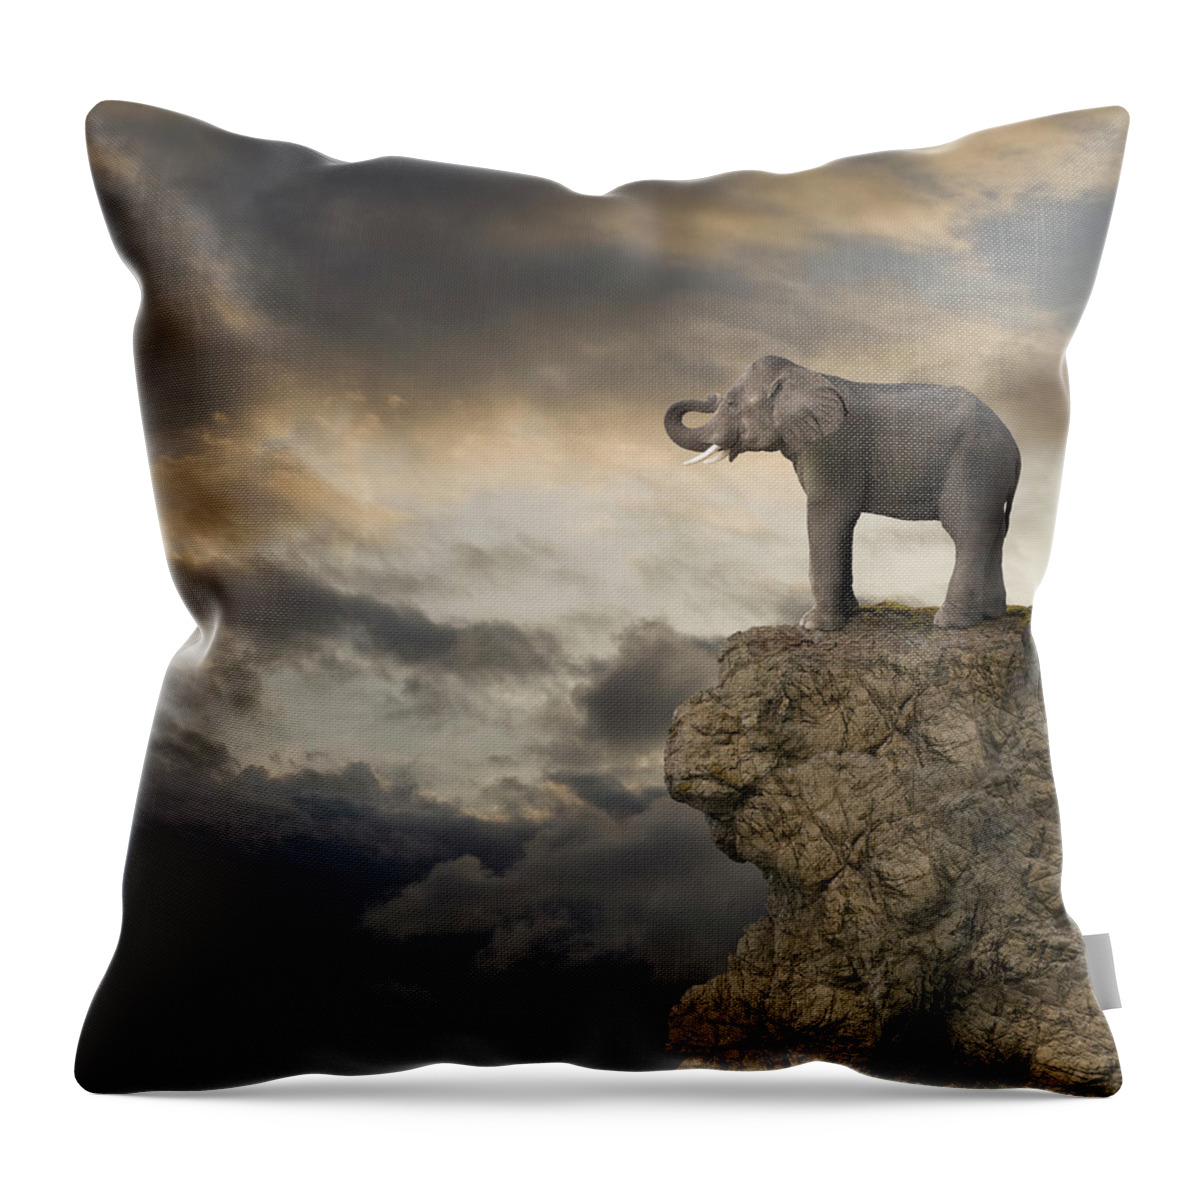 Risk Throw Pillow featuring the photograph Elephant On The Edge Of A Cliff by John Lund